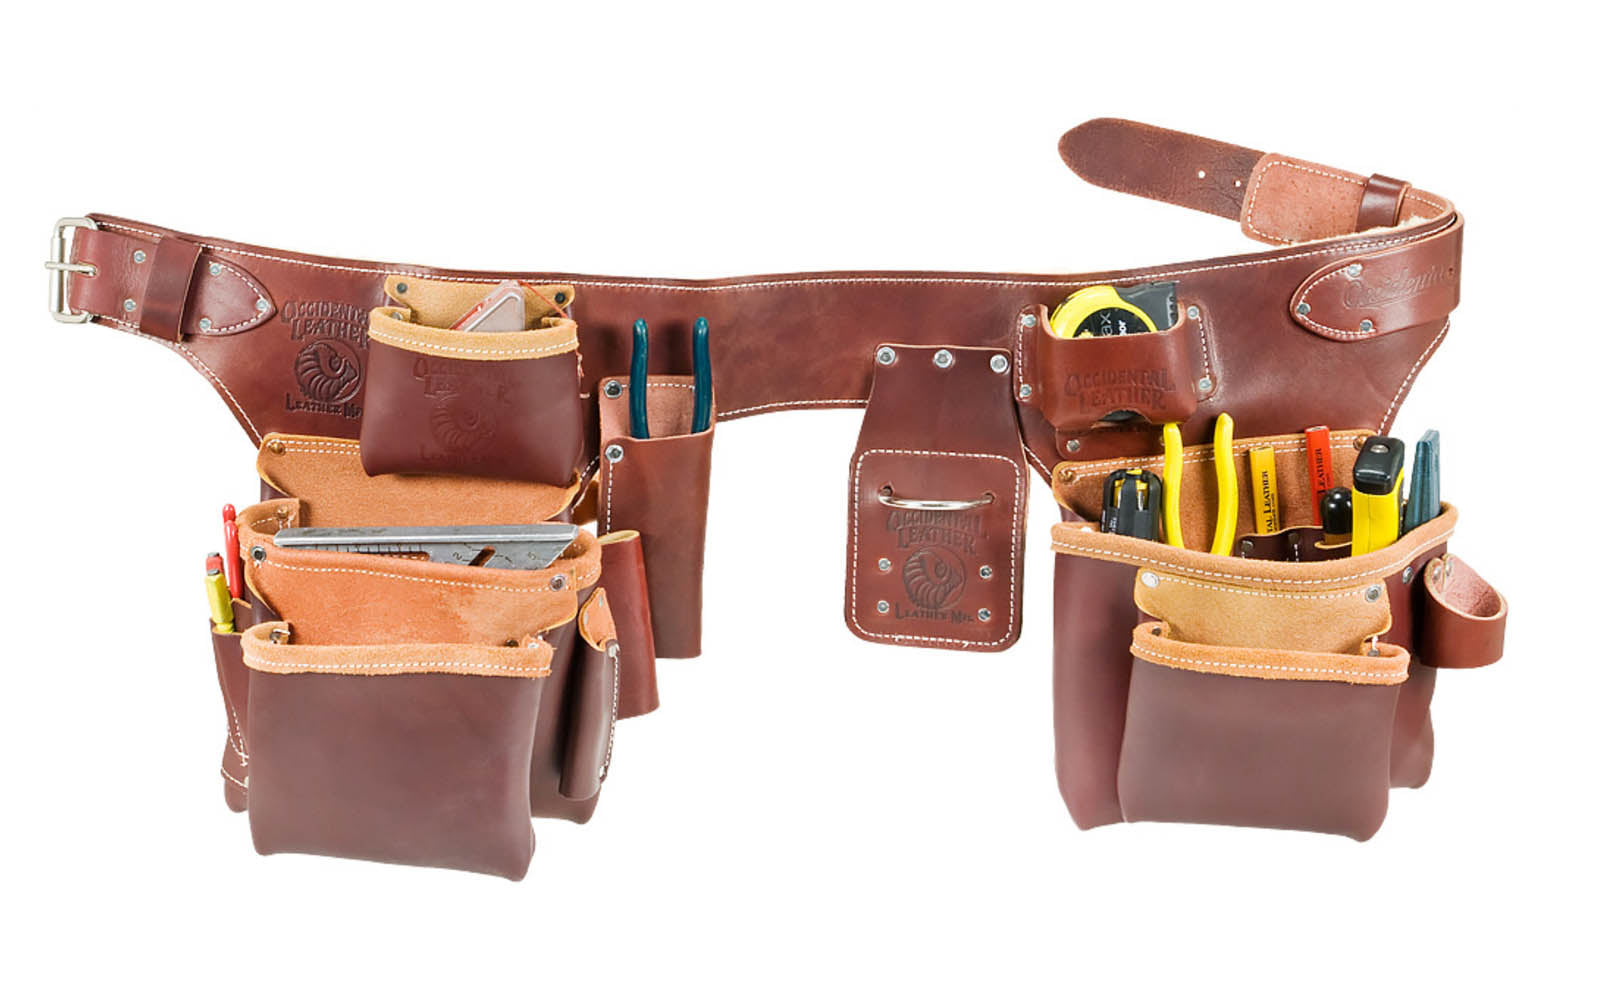 Occidental Leather "Pro Carpenter" 5-Bag Assembly Tool Belt Set Package ~ 5191 M - 3" Medium Ranger Work Belt - Premium Top-Grain Leather - Copper Rivets. Enhanced comfort with Sheepskin lining  - 22 Pockets & Tool Holders - 759244149753. "Pro Leather" series is made of top grain cow hides tanned with oils & waxes